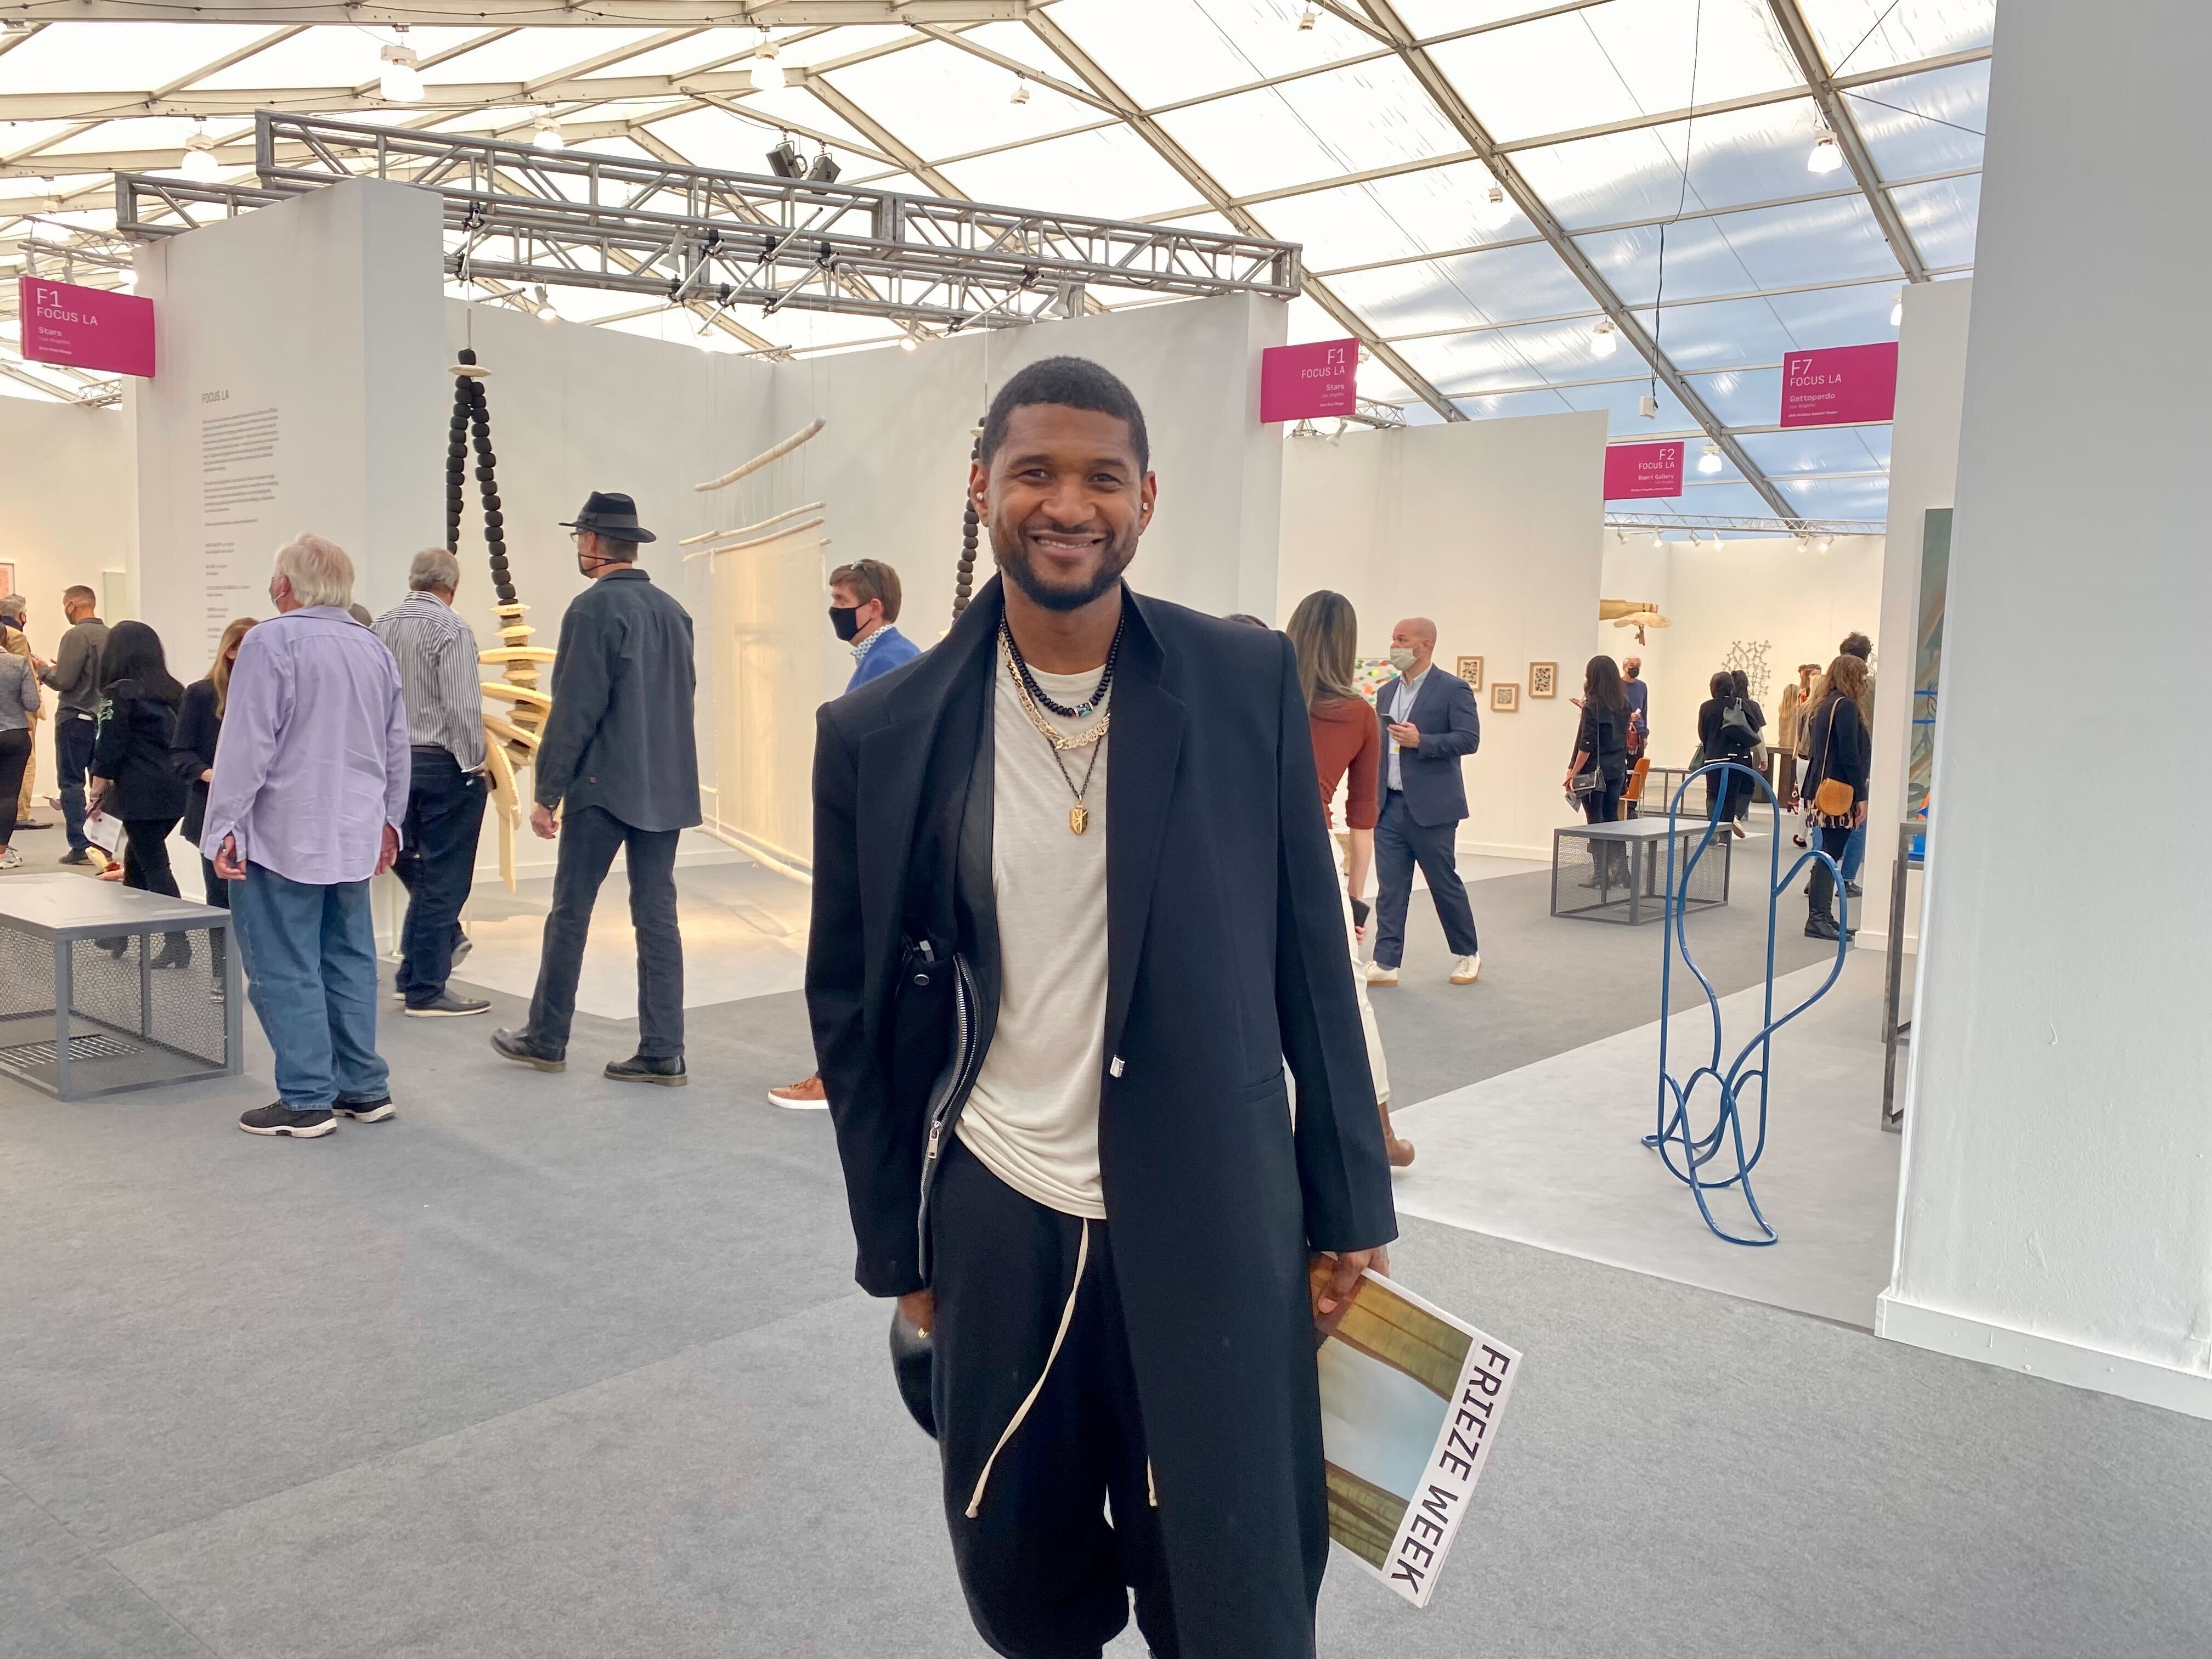 Frieze Los Angeles VIP Opening Day Draws Gwyneth Paltrow, Lionel